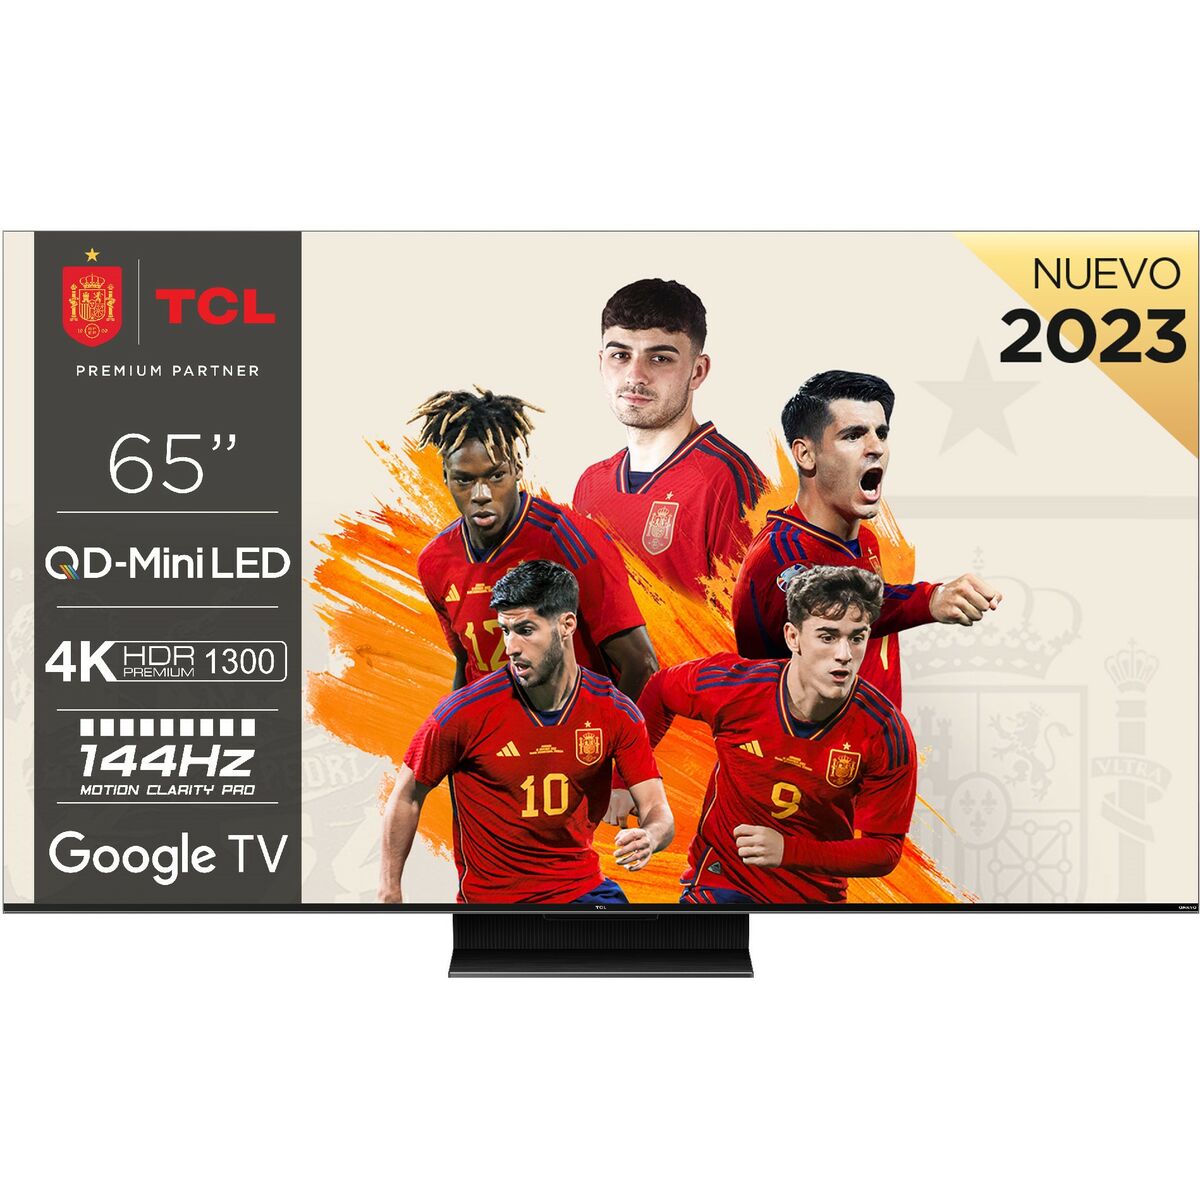 Smart TV TCL 65C805 65" 4K Ultra HD LED HDR AMD FreeSync, TCL, Electronics, TV, Video and home cinema, smart-tv-tcl-65c805-65-4k-ultra-hd-led-hdr-amd-freesync, : 65 INCHES 165 CM, :65 INCHES or 165.1 CM, :AMD Freesync, :QLED, :Ultra HD, Brand_TCL, category-reference-2609, category-reference-2625, category-reference-2931, category-reference-t-18805, category-reference-t-18827, category-reference-t-19653, cinema and television, Condition_NEW, entertainment, Price_800 - 900, RiotNook